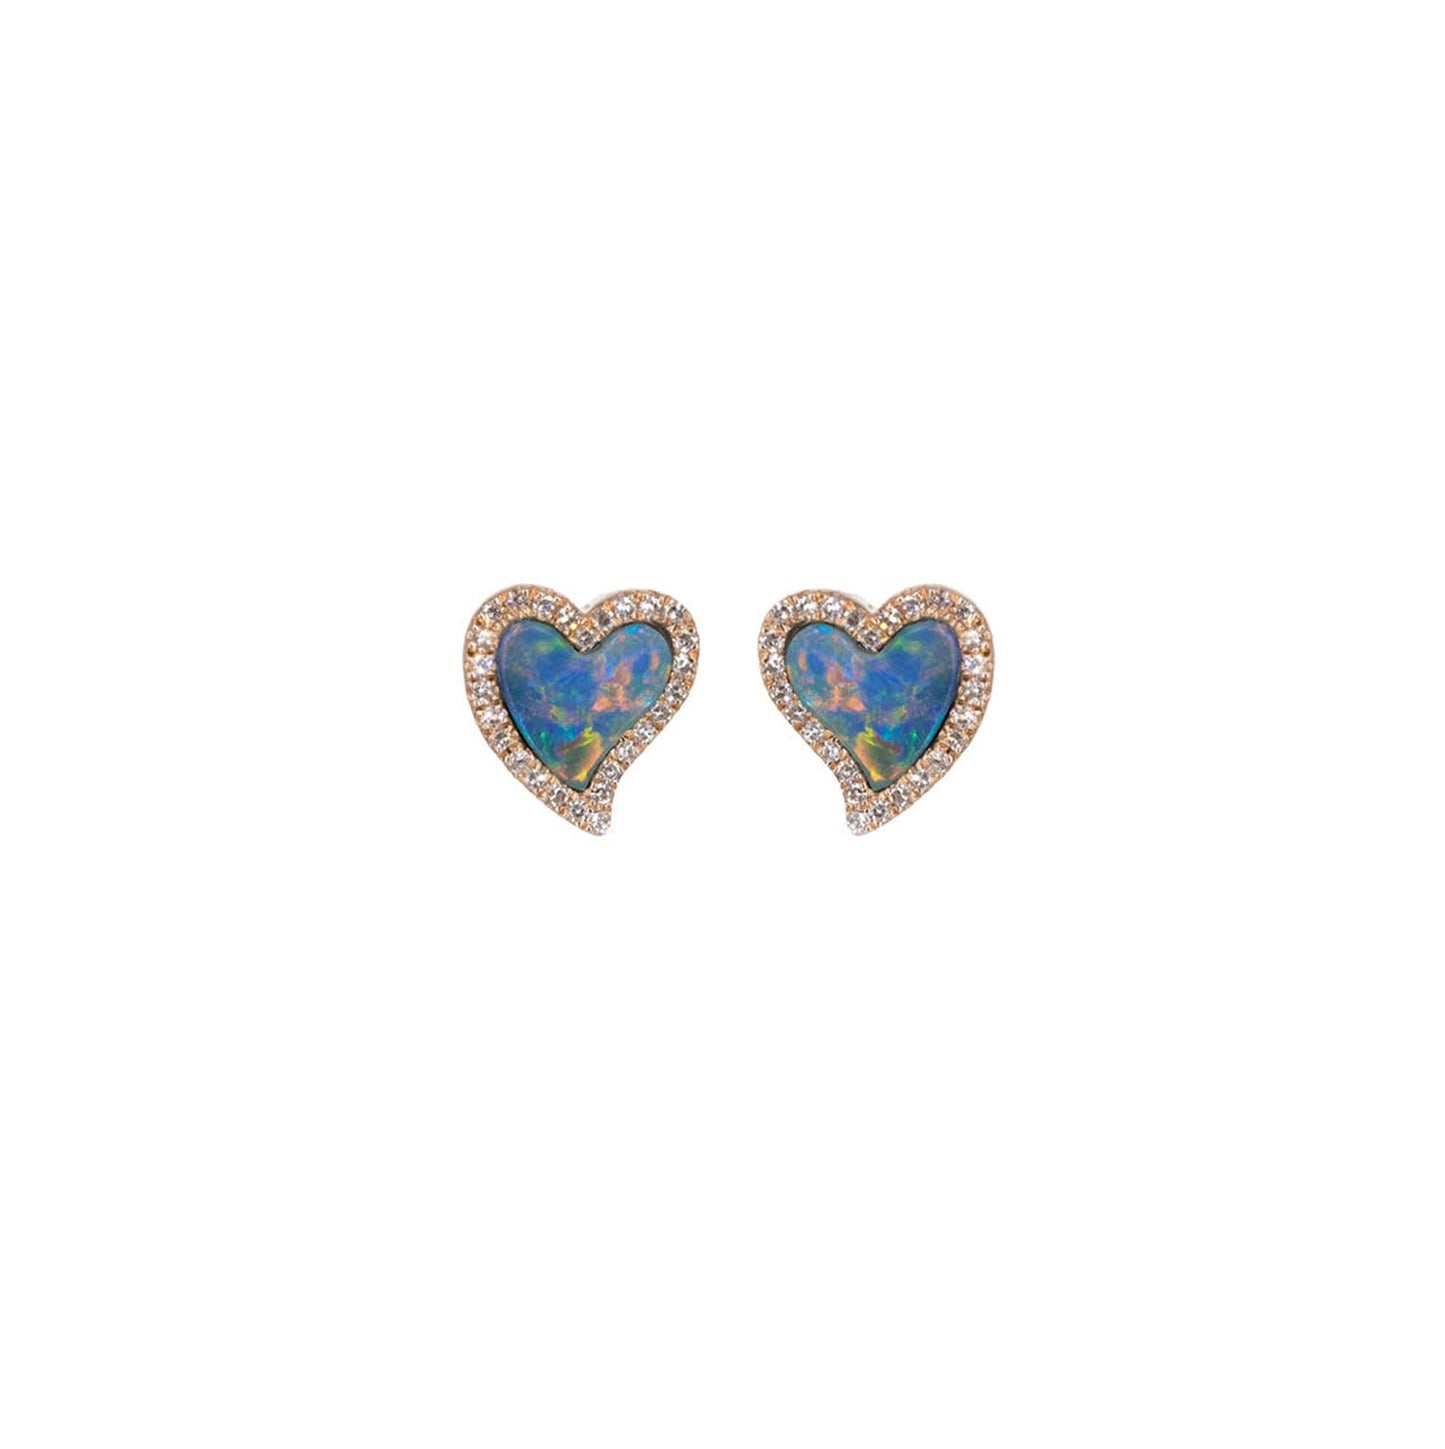 14KT Rose Gold Diamond Pave and Opal Heart Earrings